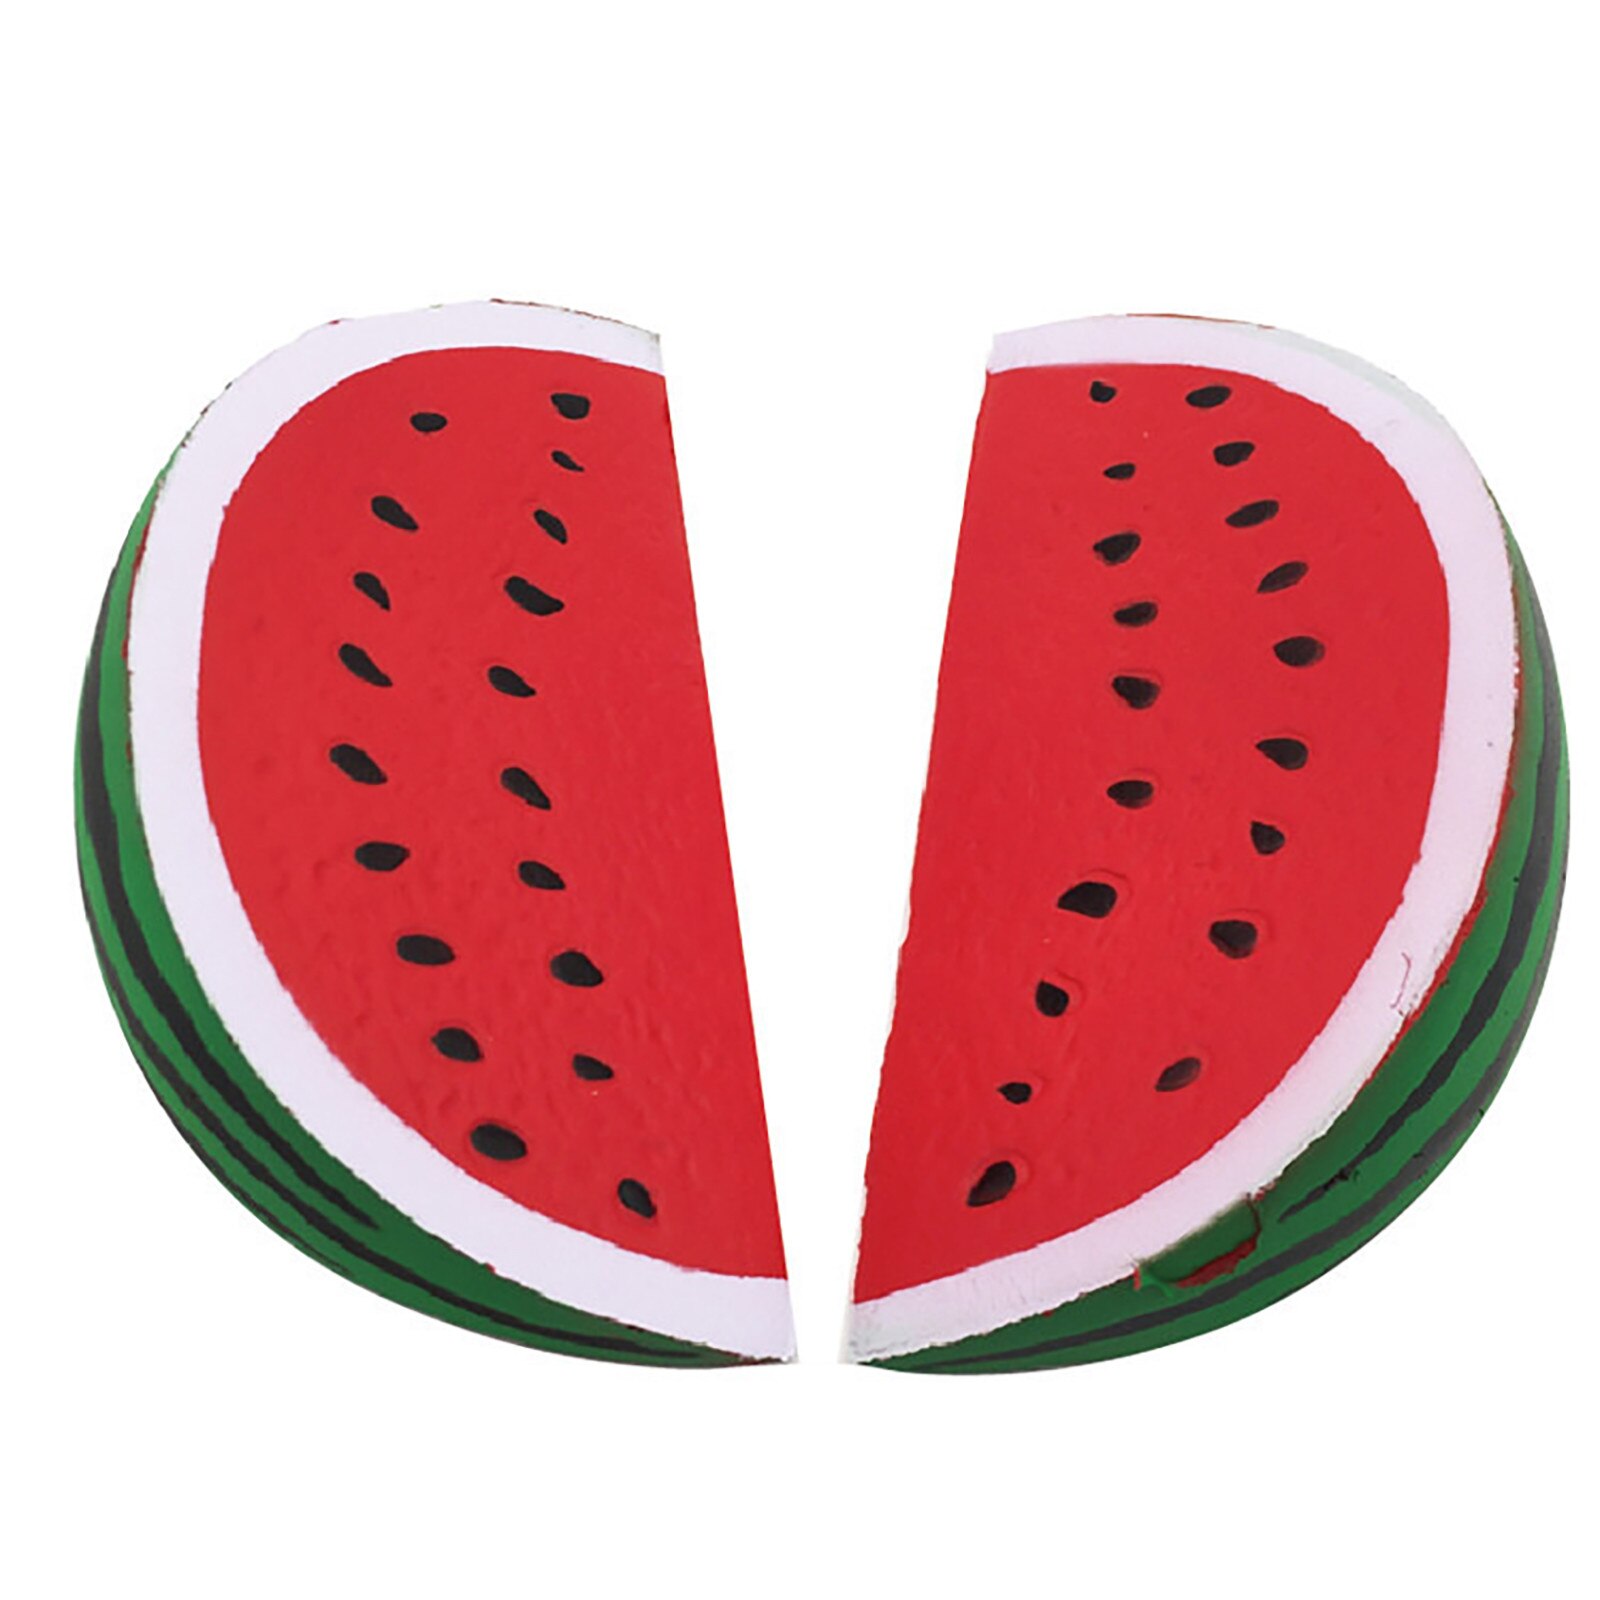 14-17cm Antistress Simulation Soft Watermelon Squeeze Fidget Toys Slow Rising Stress Reliever Toy Slow Rebound Funny Kids Gifts